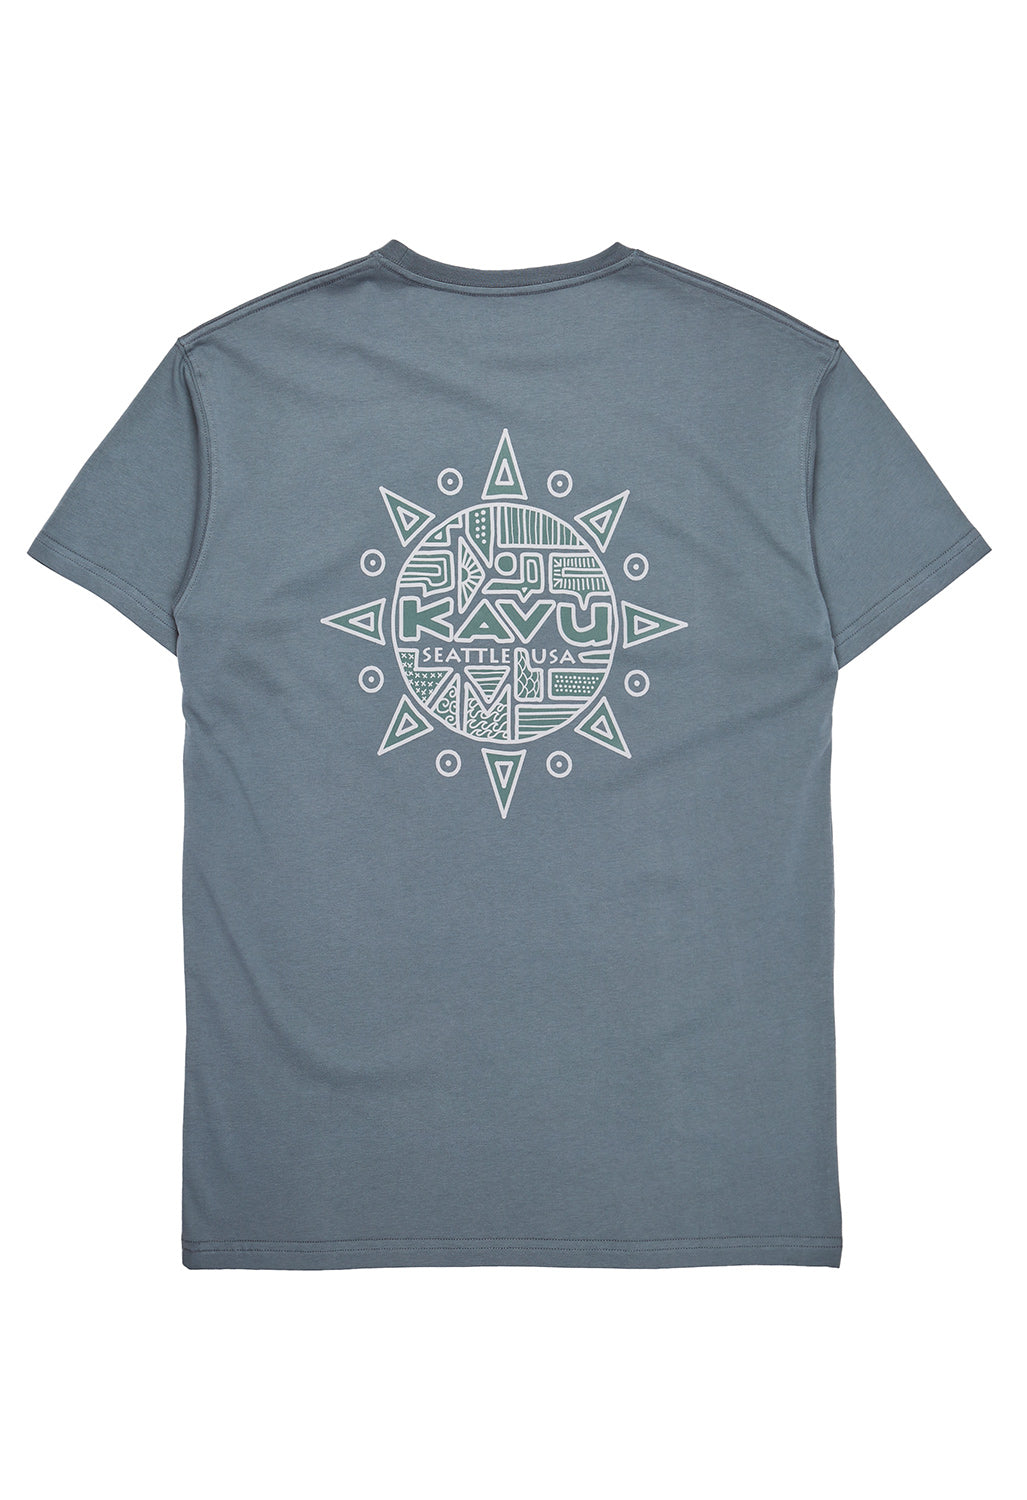 KAVU Men's Compass Tee - Stormy Weather – Outsiders Store UK